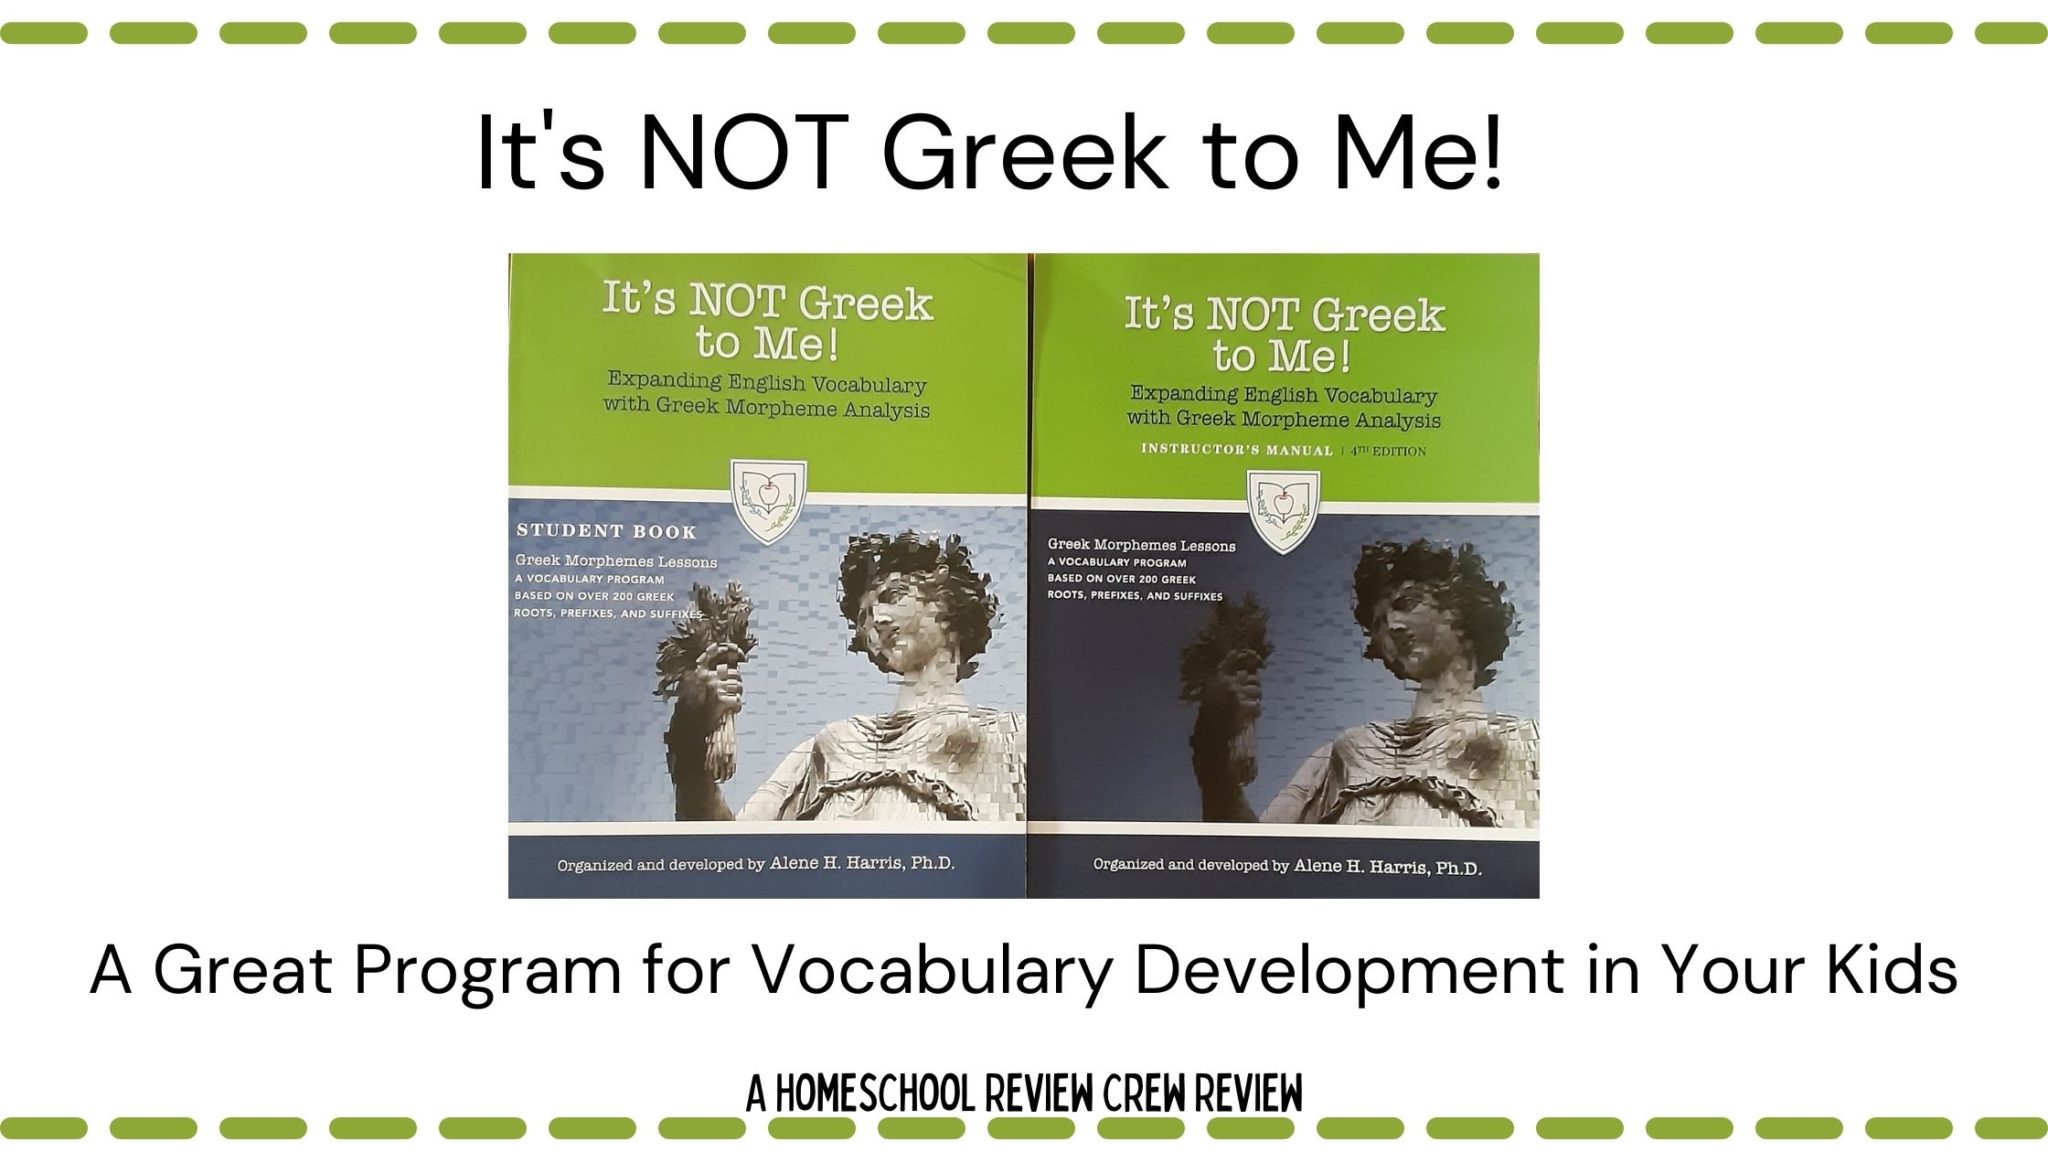 You are currently viewing It’s NOT Greek to Me! A Great Program for Vocabulary Development in Your Kids